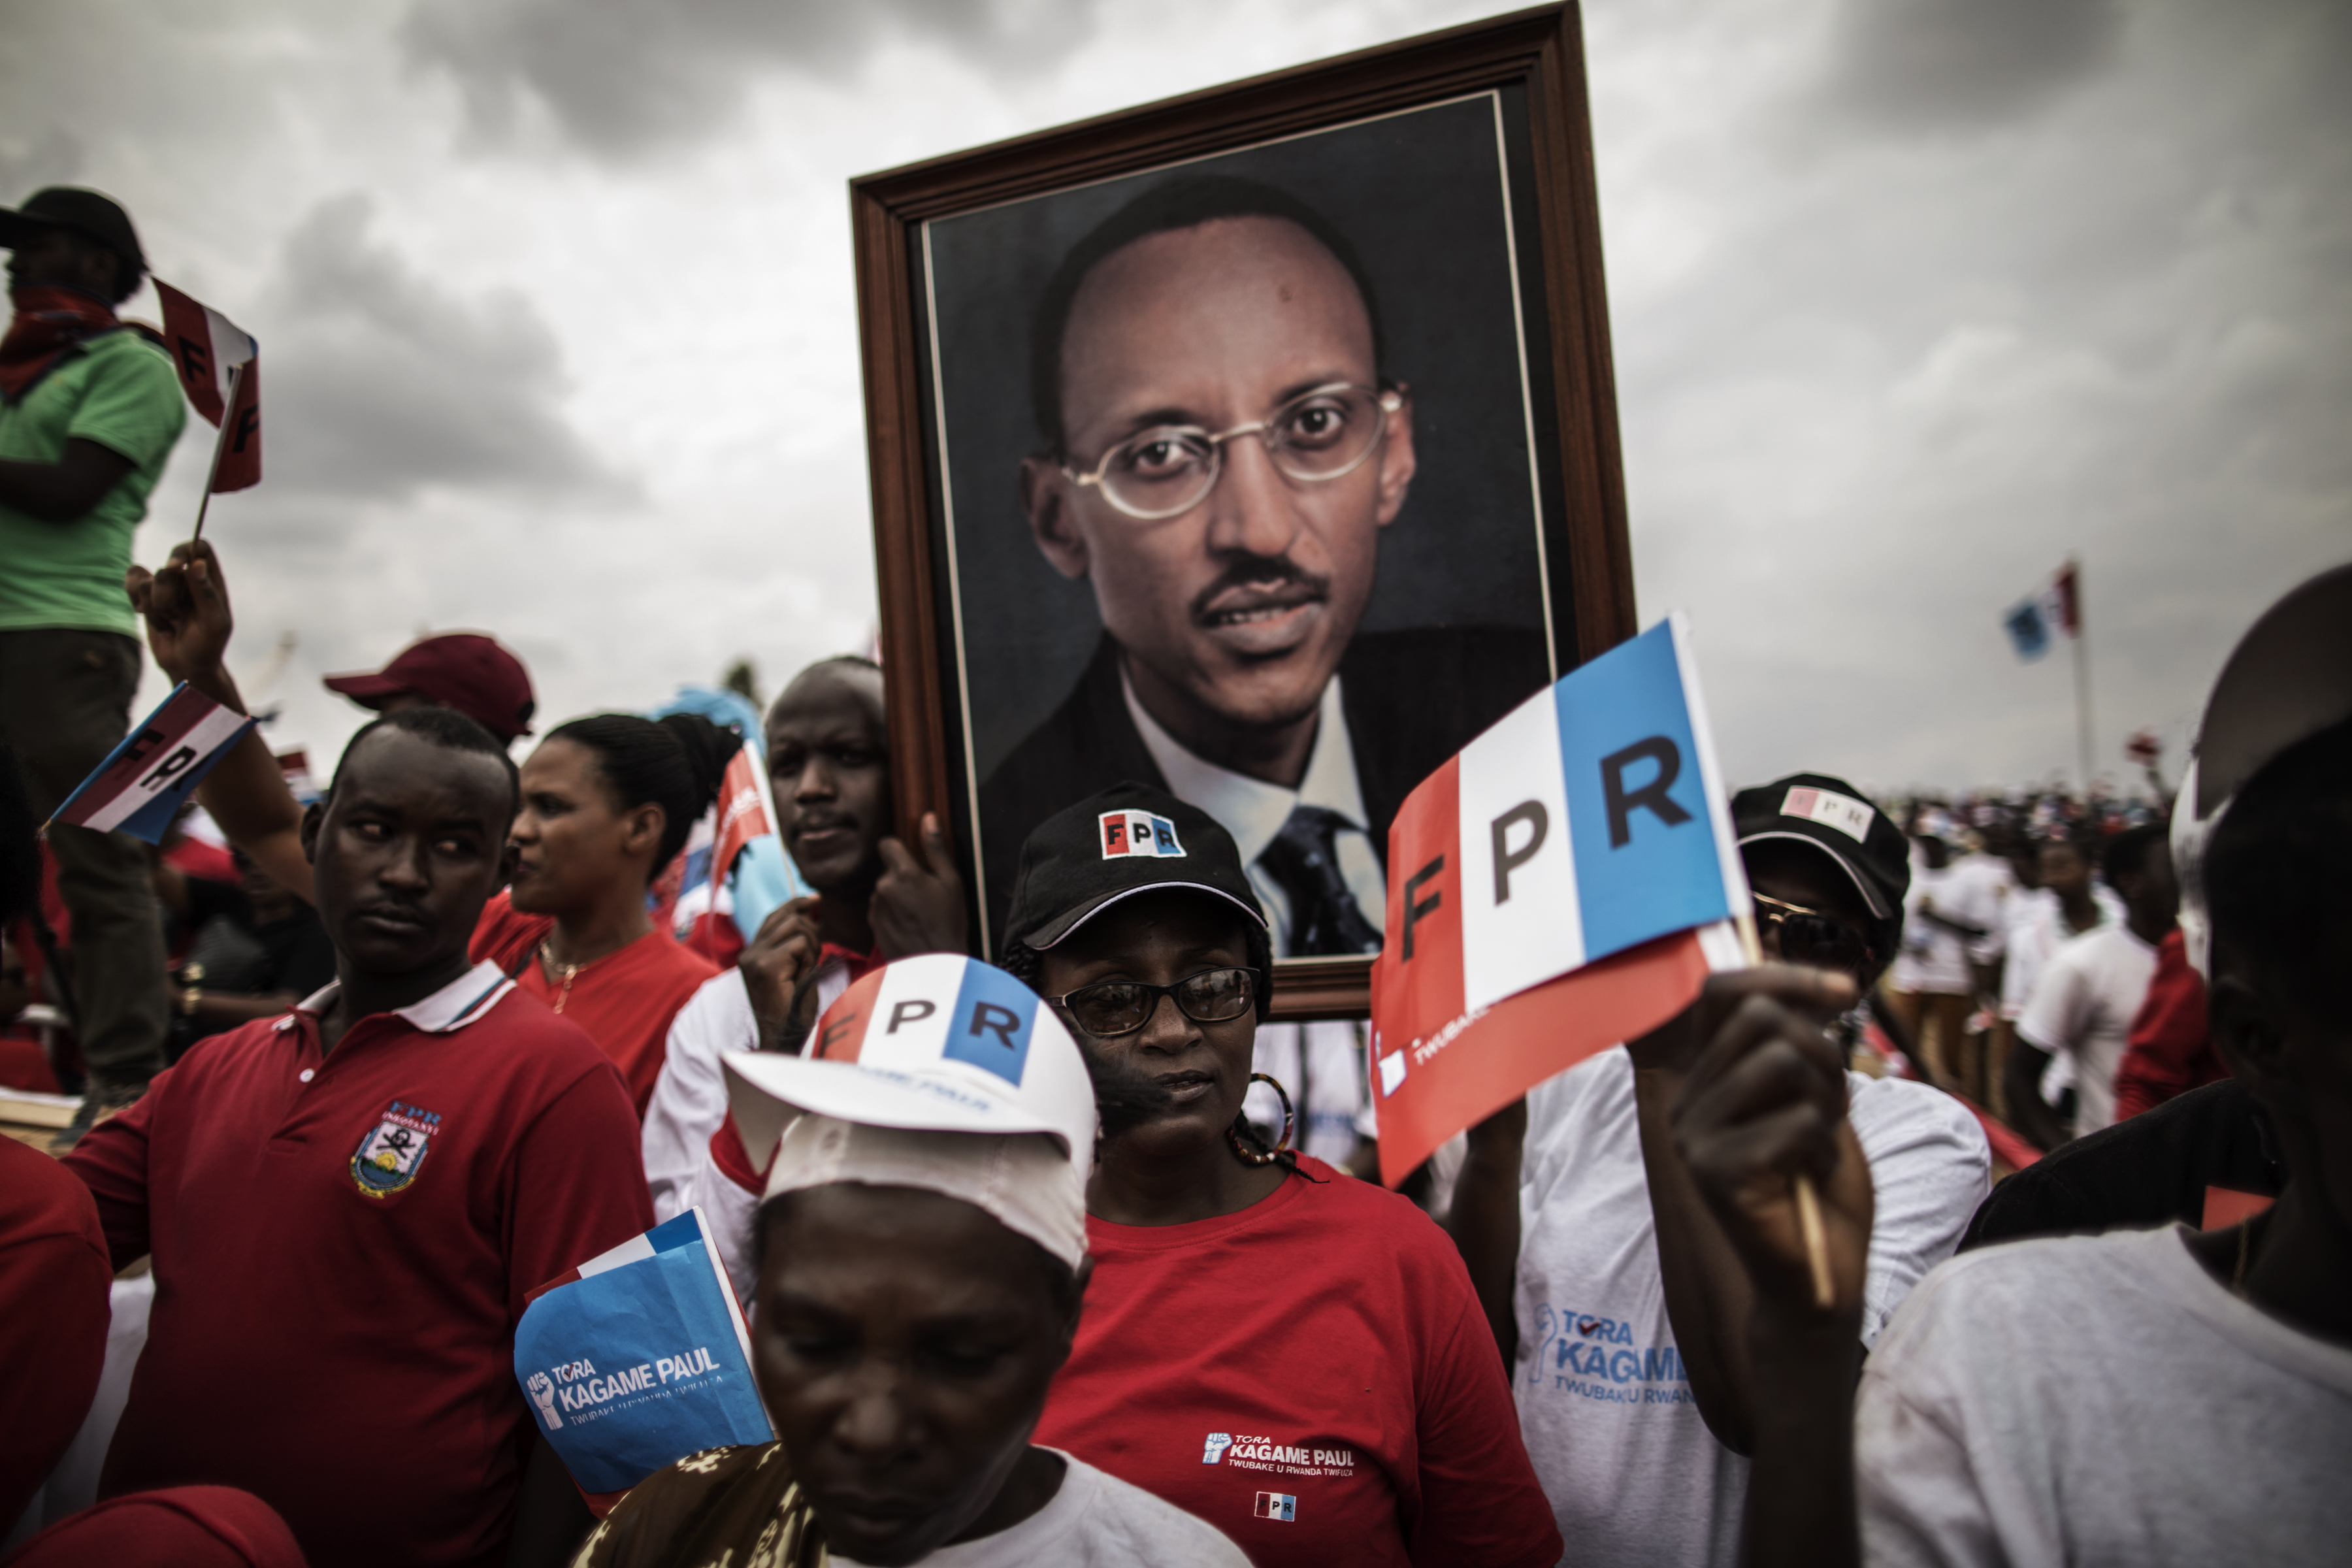 Supporters of incumbent President Paul Kagame carry a large photograph of him during the campaign's closing rally in Kigali, on August 2, 2017.